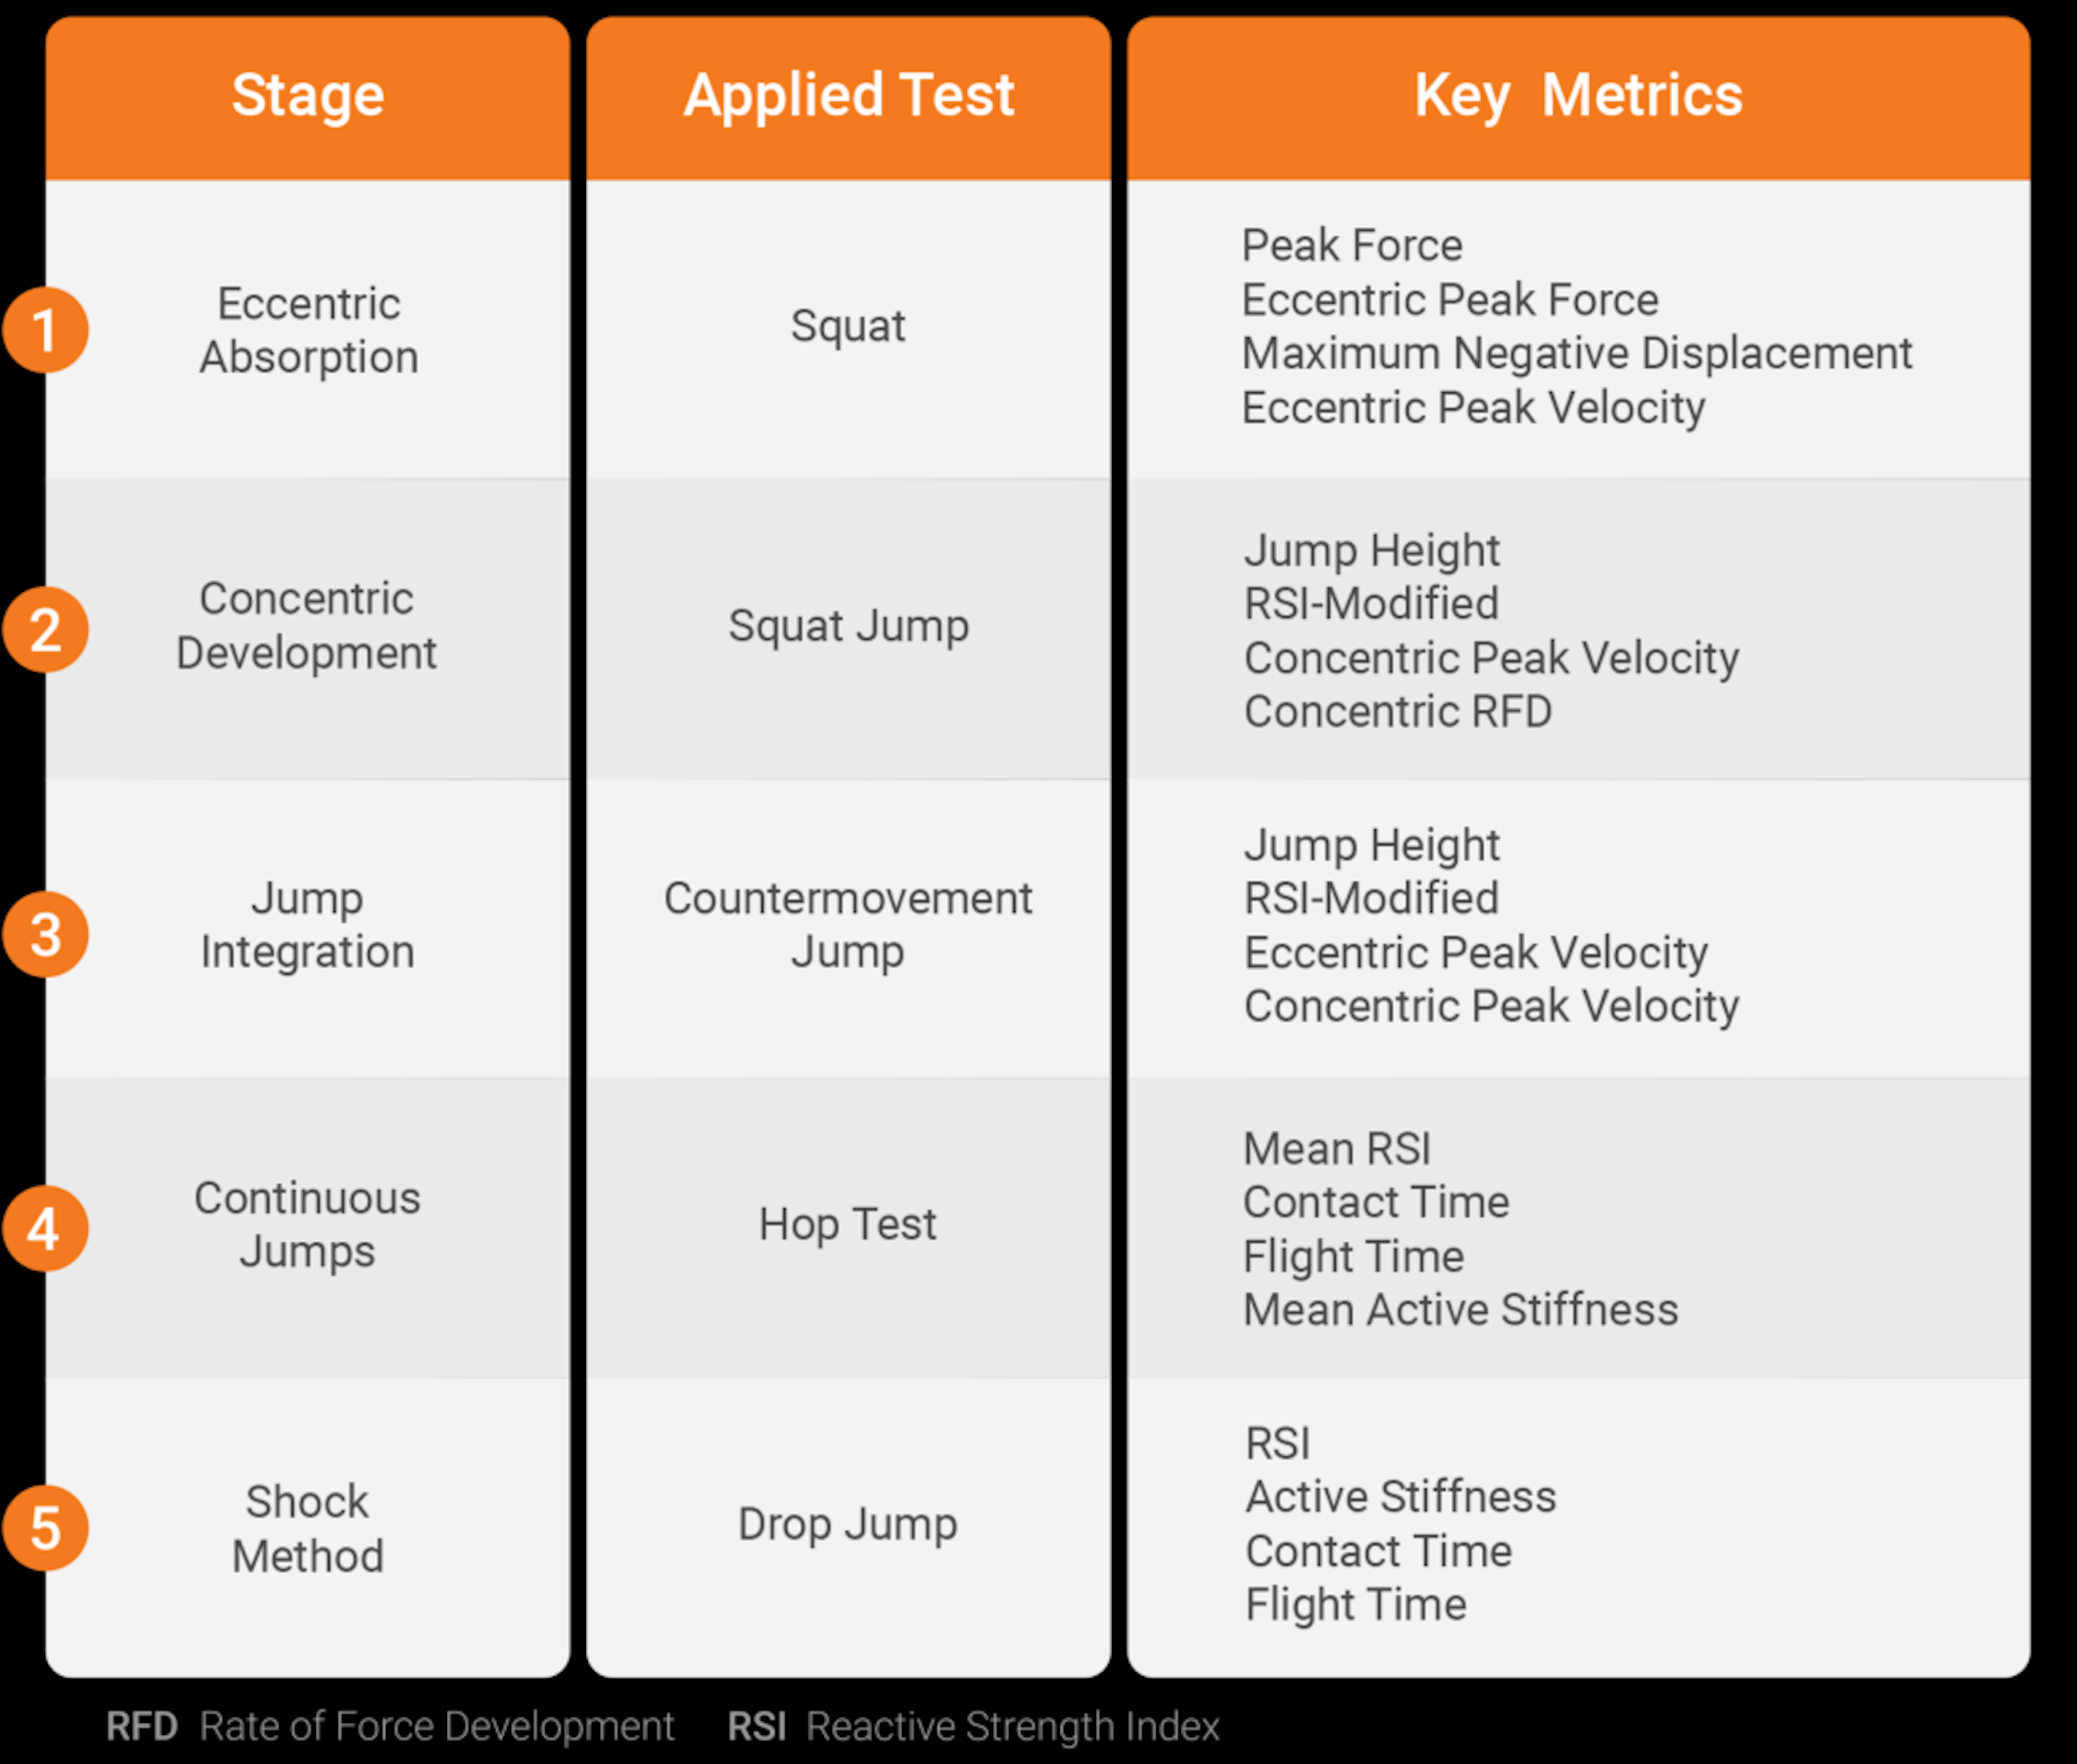 Training stages, tests, and metrics for jump performance evaluation.